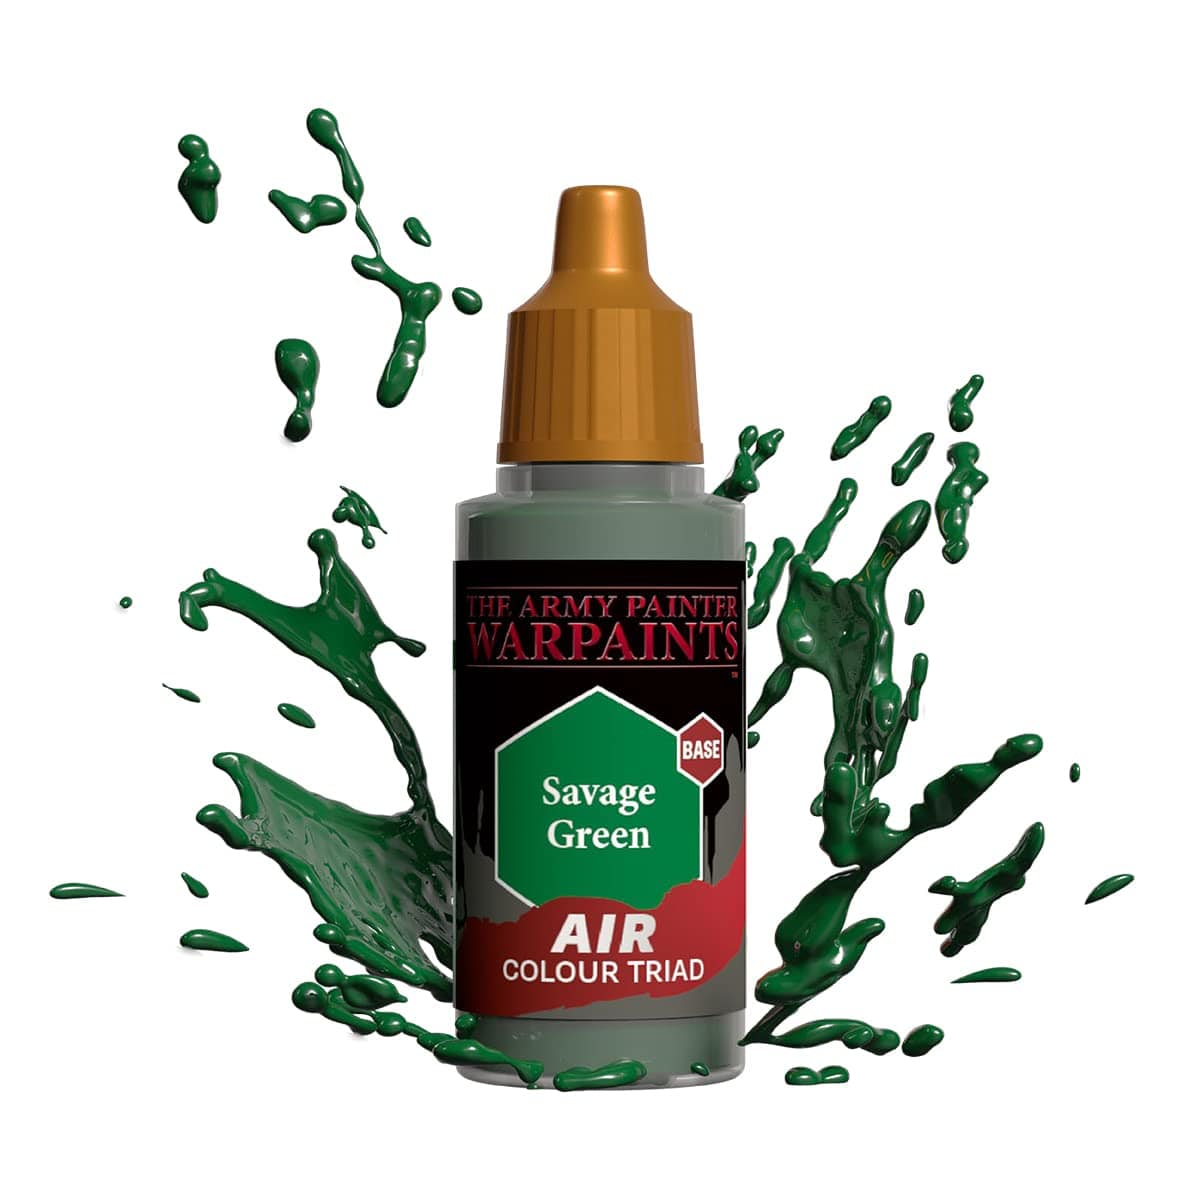 The Army Painter Warpaints Air: Savage Green 18ml - Lost City Toys